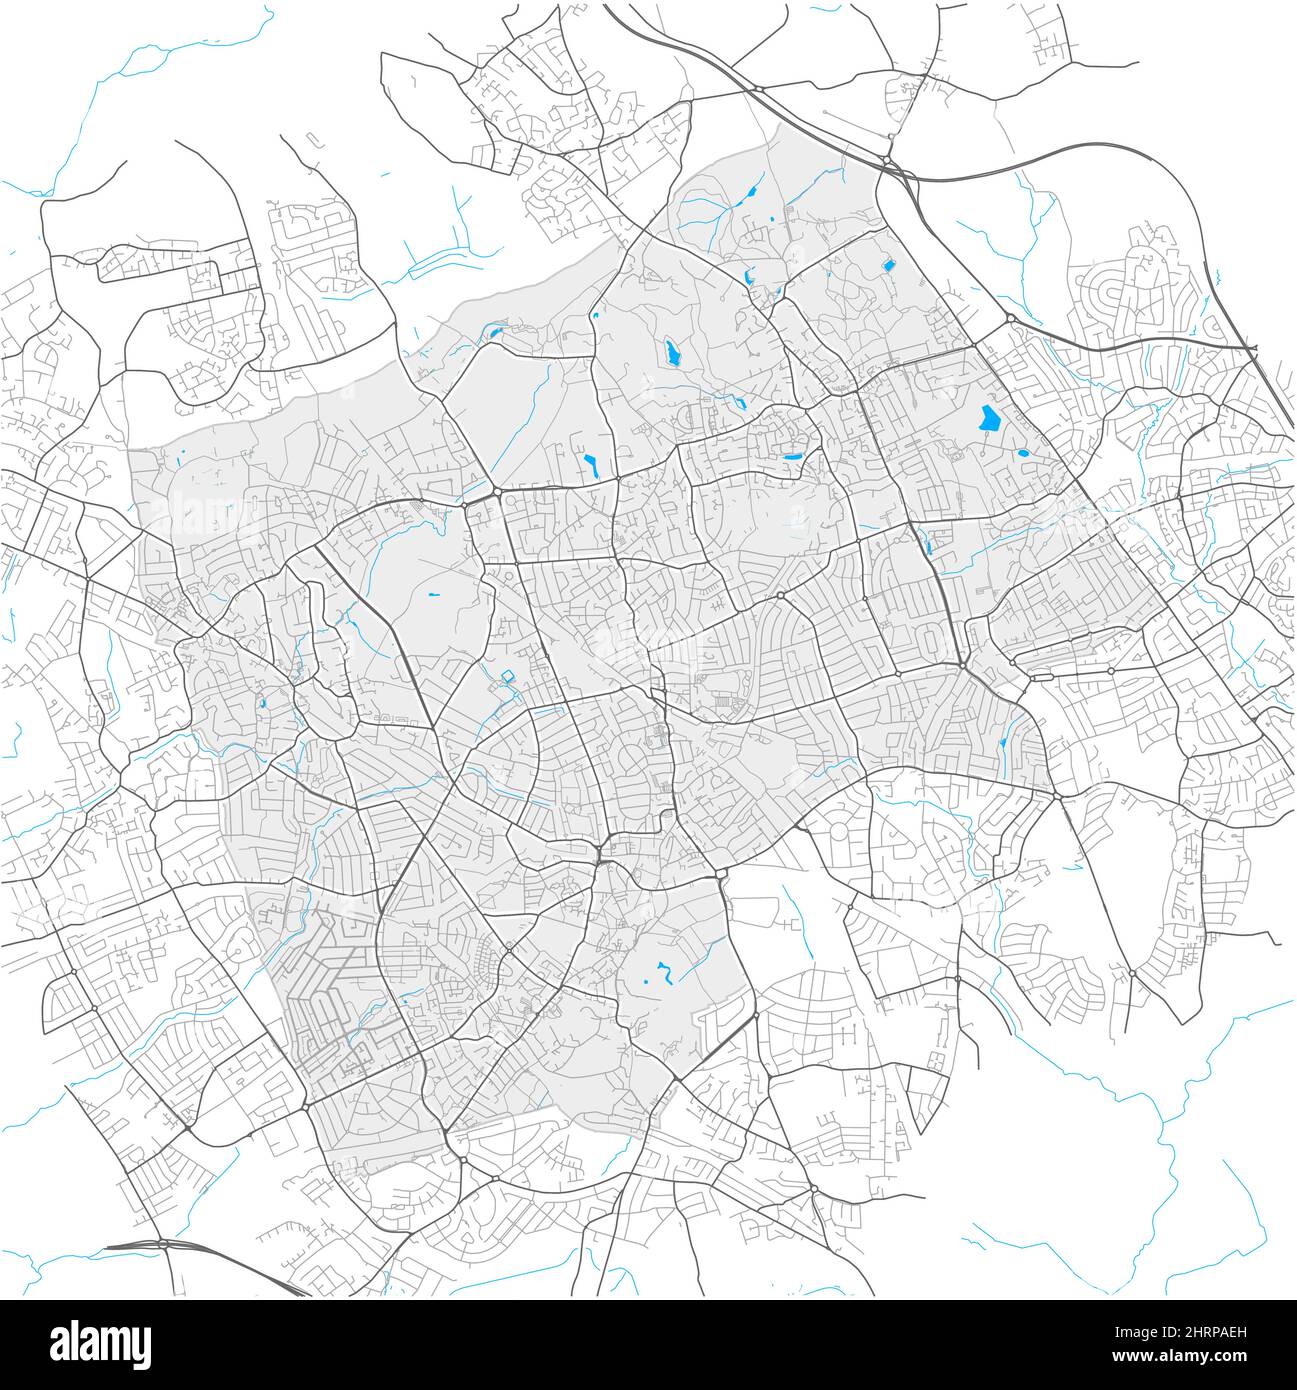 Harrow, Greater London, United Kingdom, high detail vector map with city boundaries and editable paths. White outlines for main roads. Many smaller pa Stock Vector